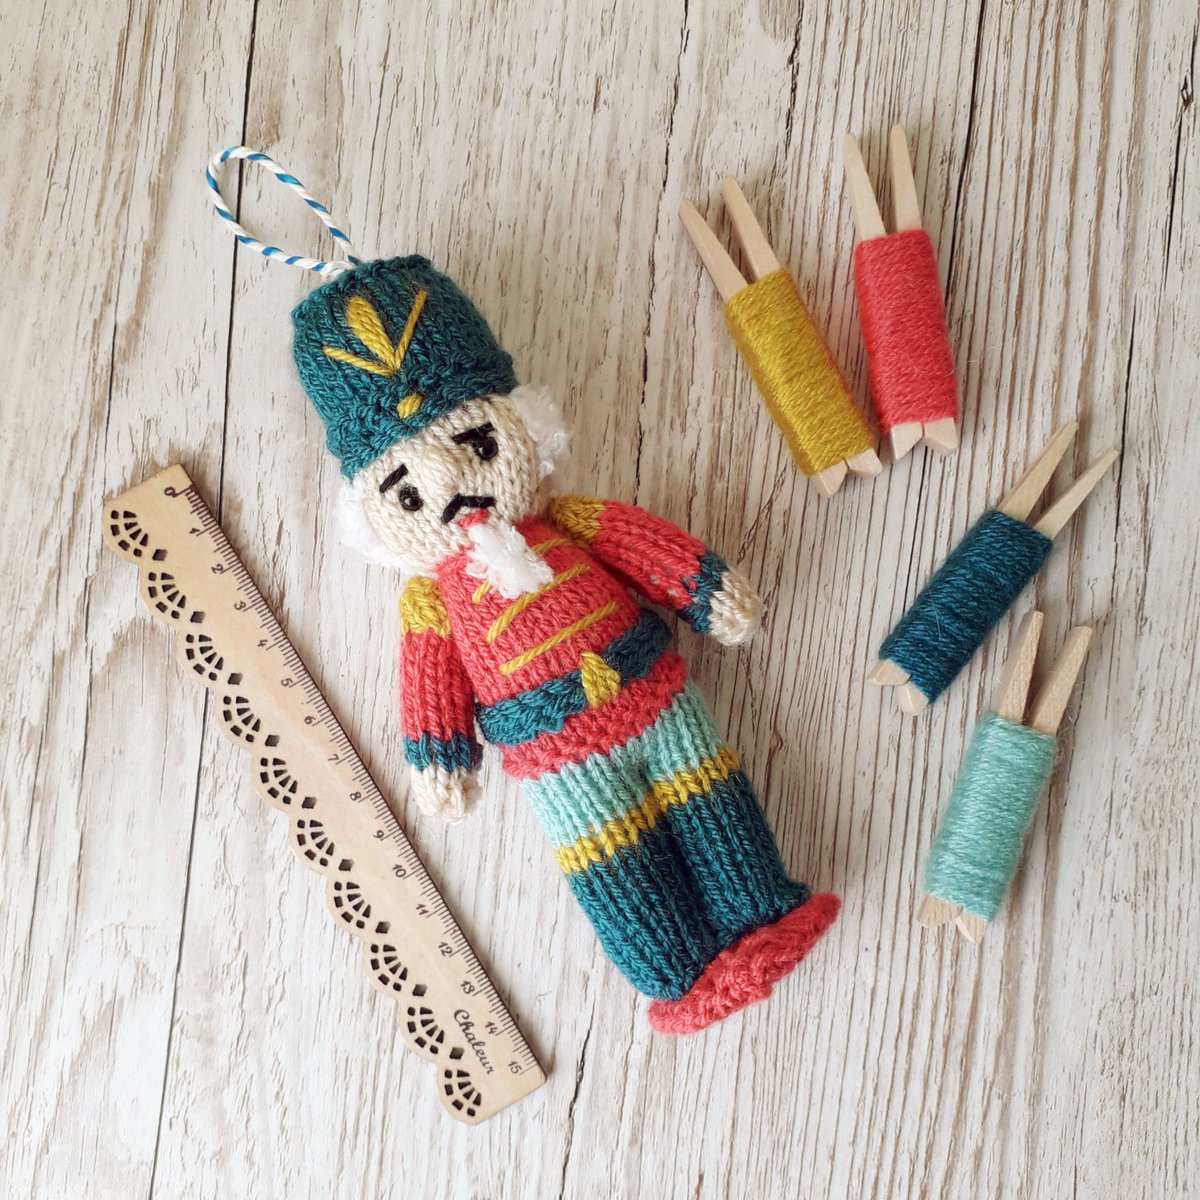 This nutcracker doll is big enough to stand on a shelf or hang on your tree. He's actually the middle sized doll from the pattern- I've included info in it, so you can make both a larger and smaller version. bit.ly/Christmasknitt… #Nutcrackerdoll #handmadechristmas #knitpattern